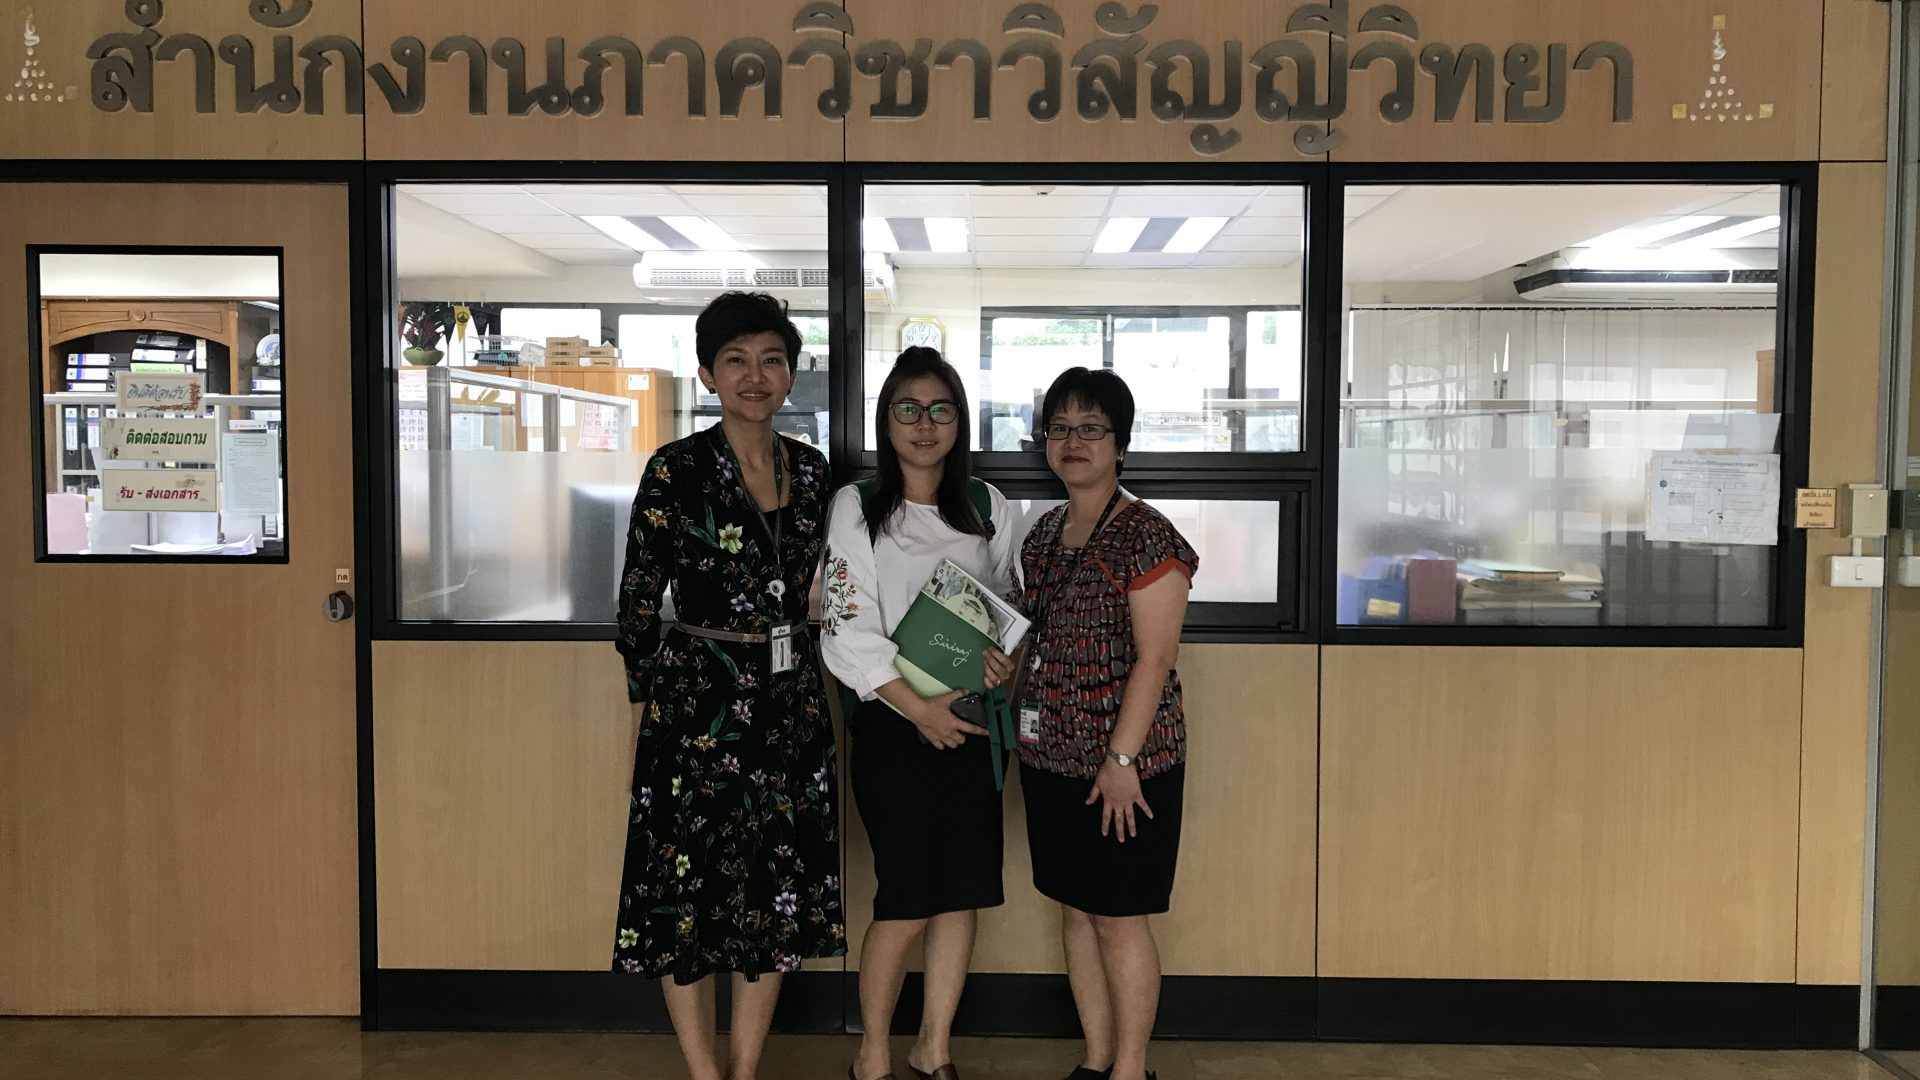 Siriraj Scholarship for Doctors from ASEAN and Developing Countries